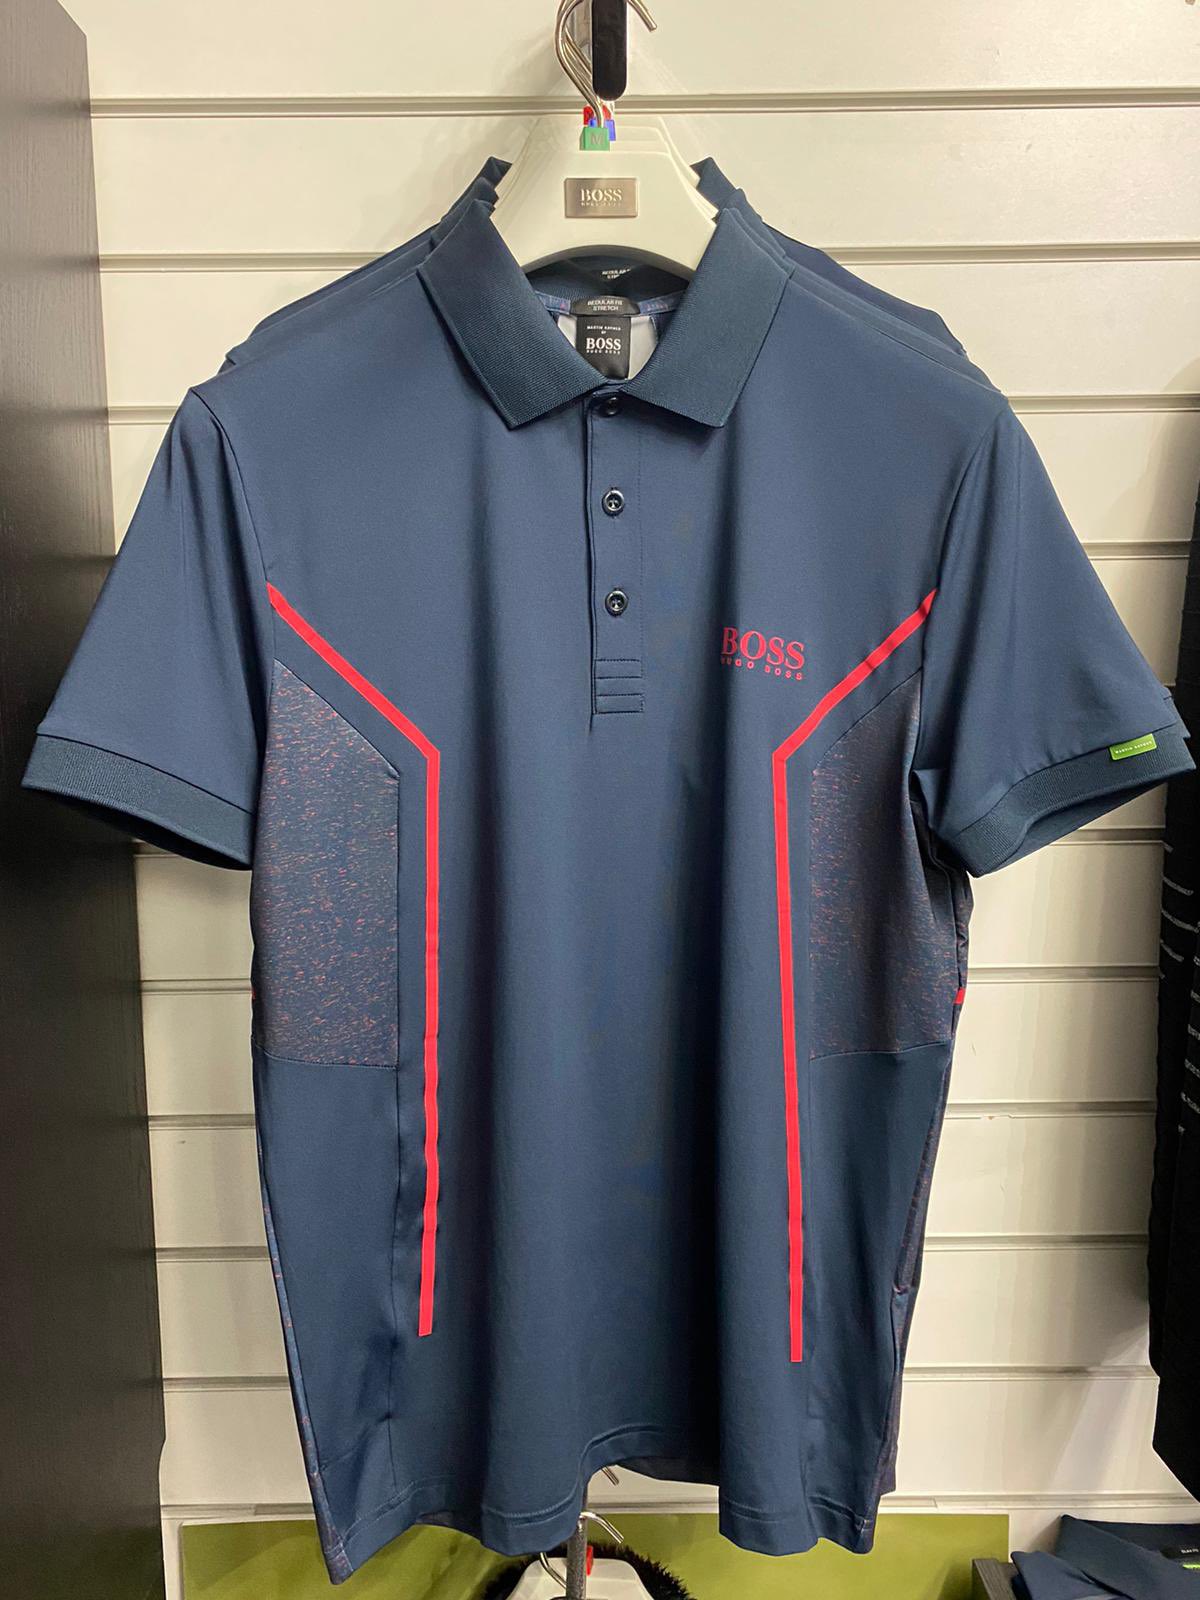 homoseksueel calorie steeg Woodsomehallproshop on Twitter: "⚫️BLACK FRIDAY DEAL 3⚫️ HUGO BOSS POLO !  Navy was £119 now £89, Black polo was £119 now £79 !! Sizes available upon  request ! #martinkaymer #lookgood #supportlocal https://t.co/ajCpxTx25g" /  Twitter